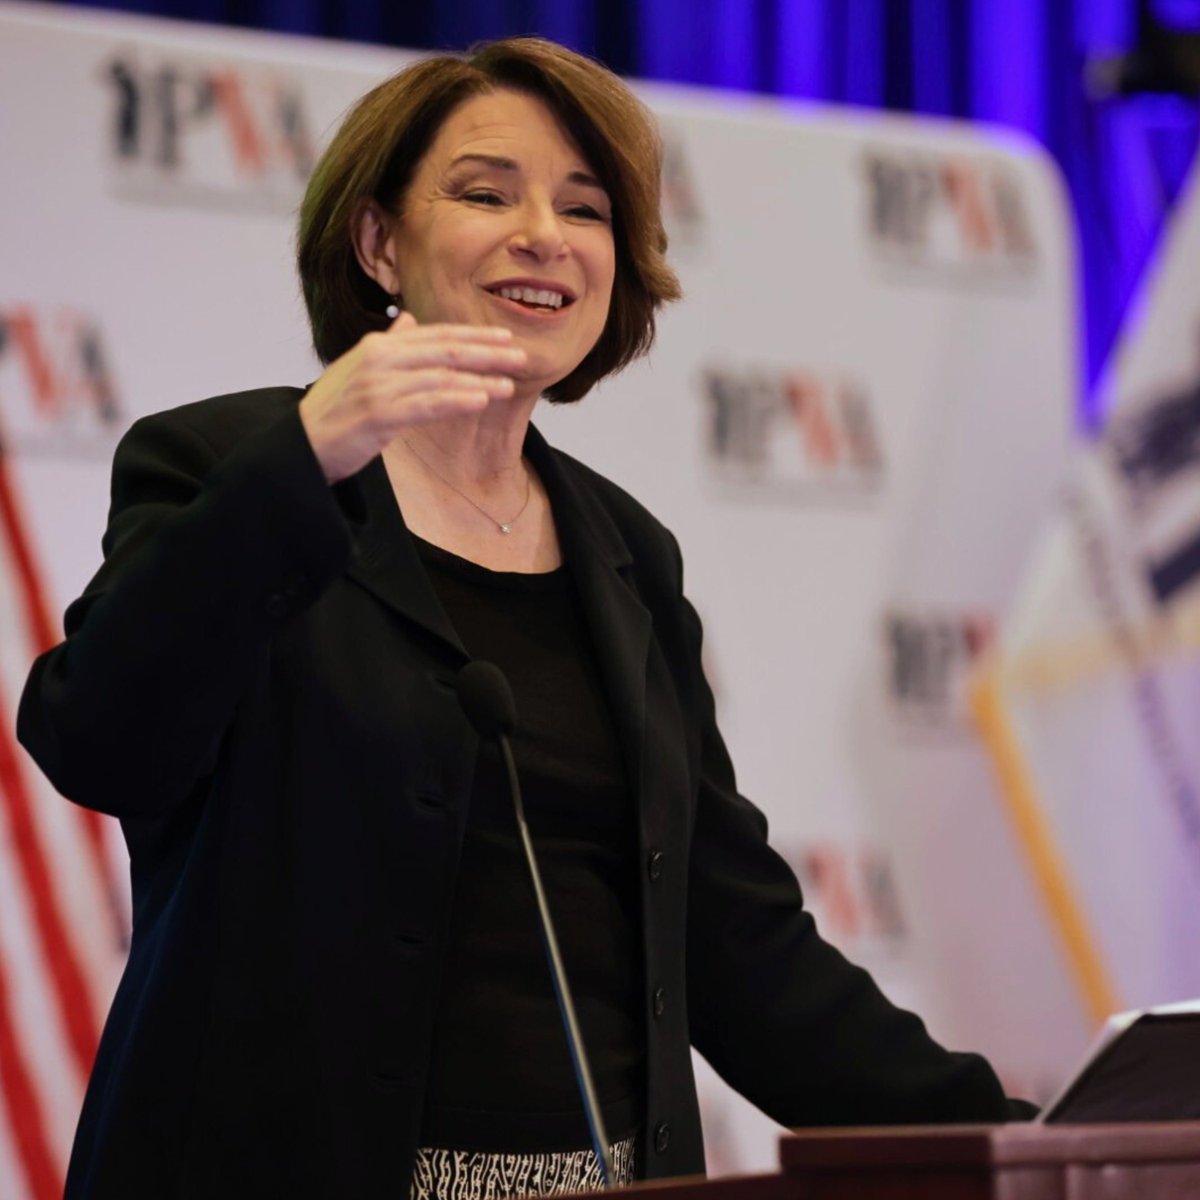 Ending our Annual Convention on a high note! 🌟 We were honored that @SenAmyKlobuchar, the FIRST woman to represent MN in the U.S. Senate, helped us wrap up a week of collaboration and #PushingAccessForward. Reply to join us in thanking her for being an ally to #Veterans 🇺🇸